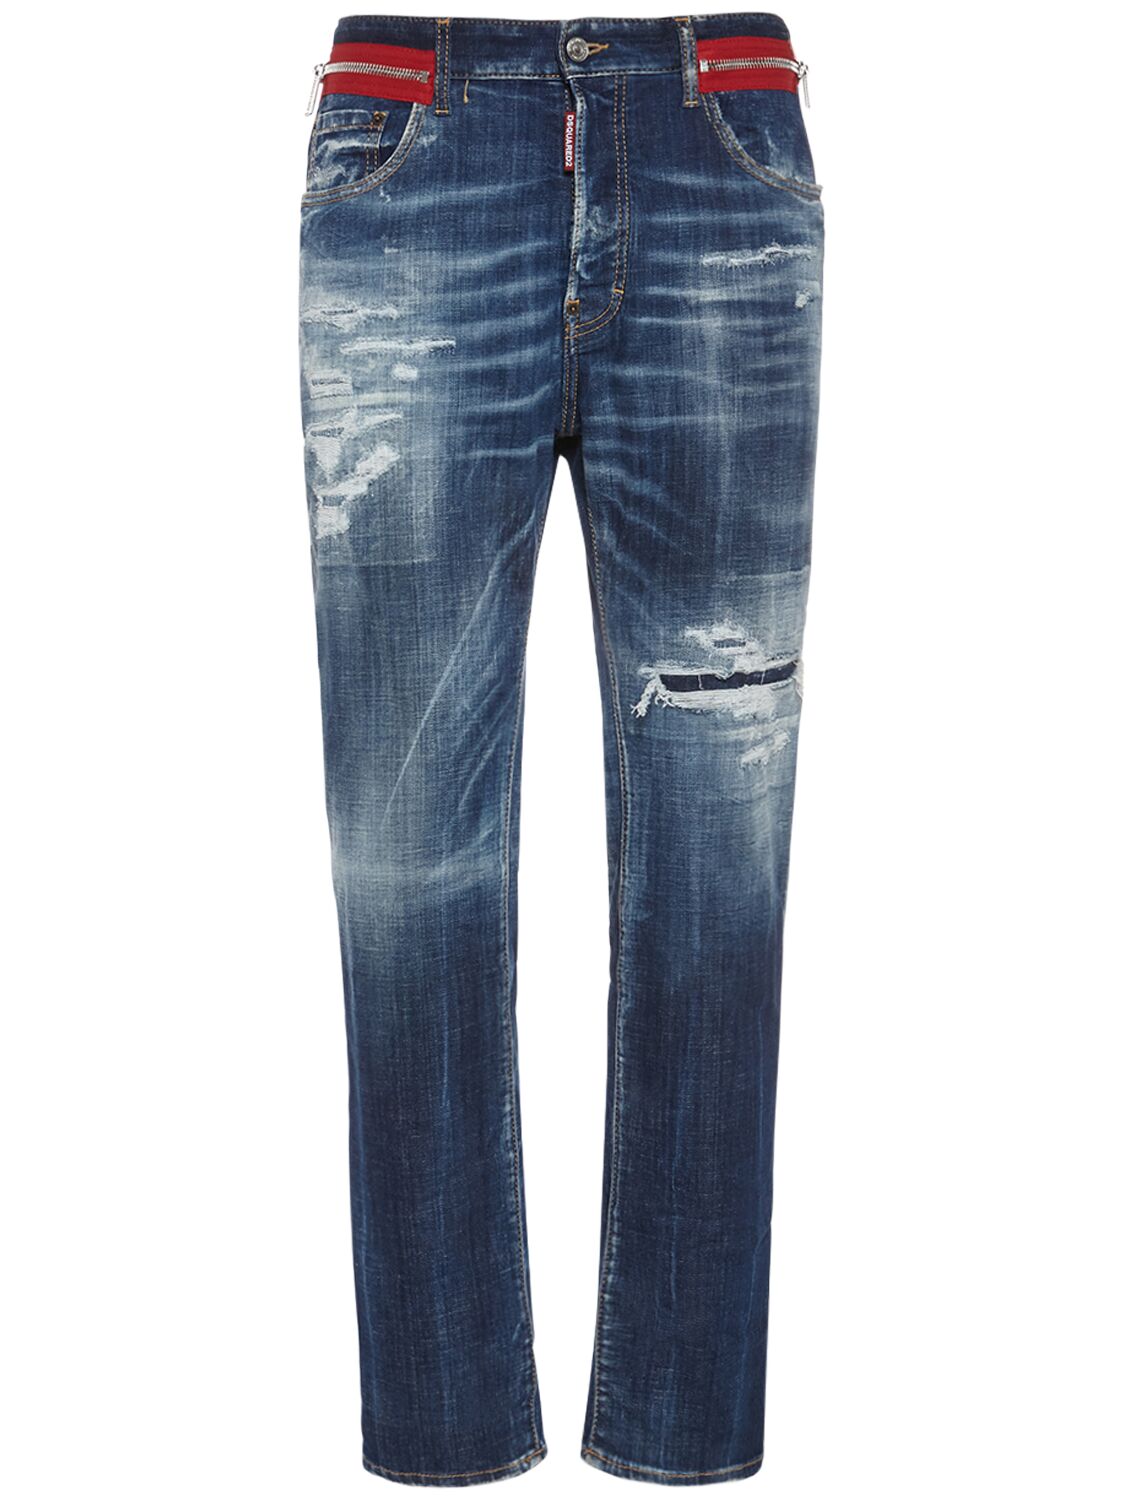 Dsquared2 642 Fit Zipped Cotton Denim Jeans In Navy